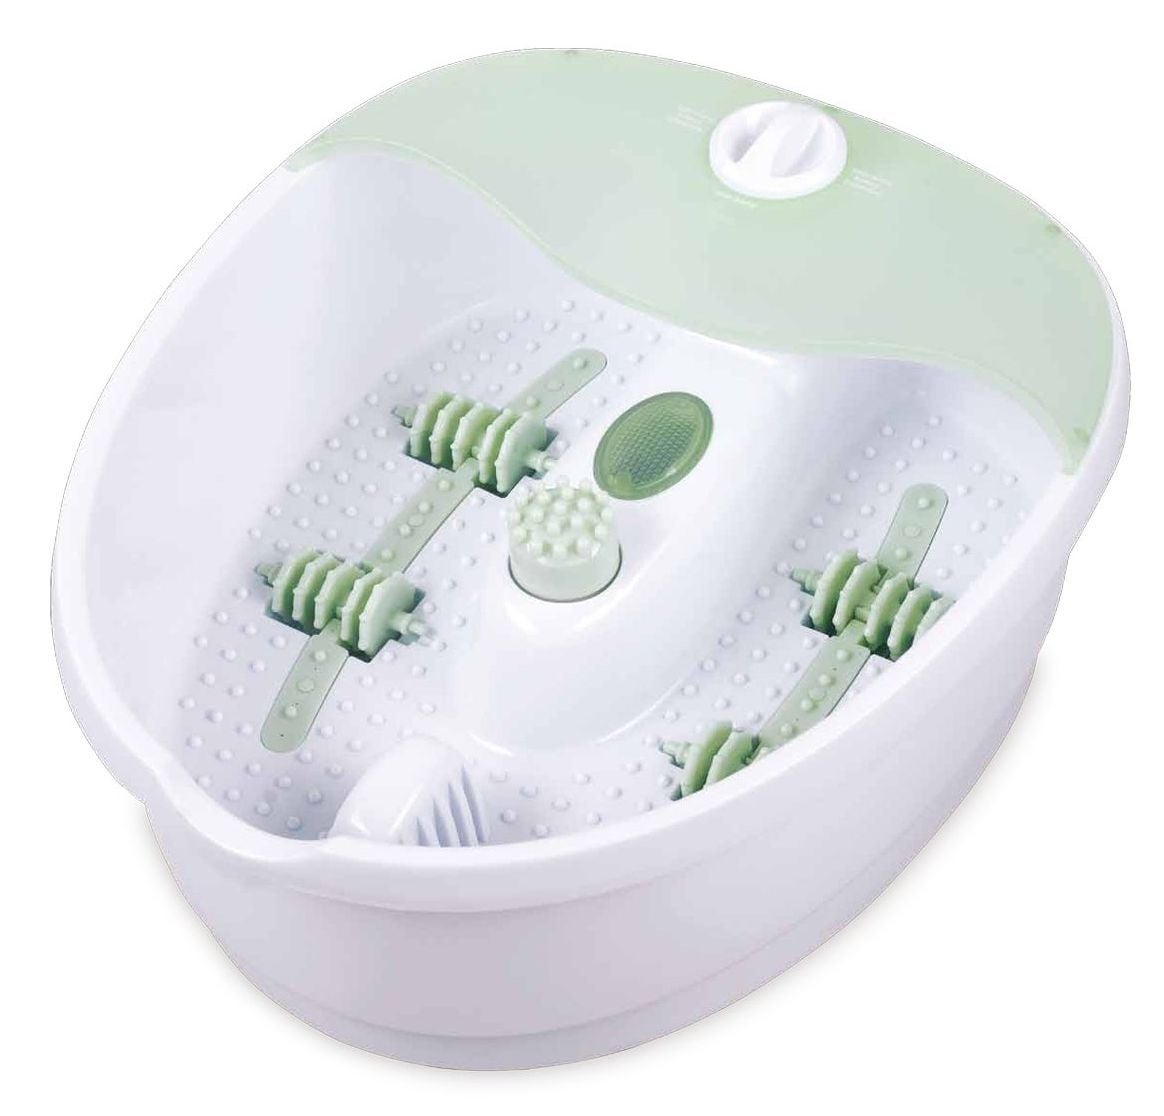 Kmart foot spa review